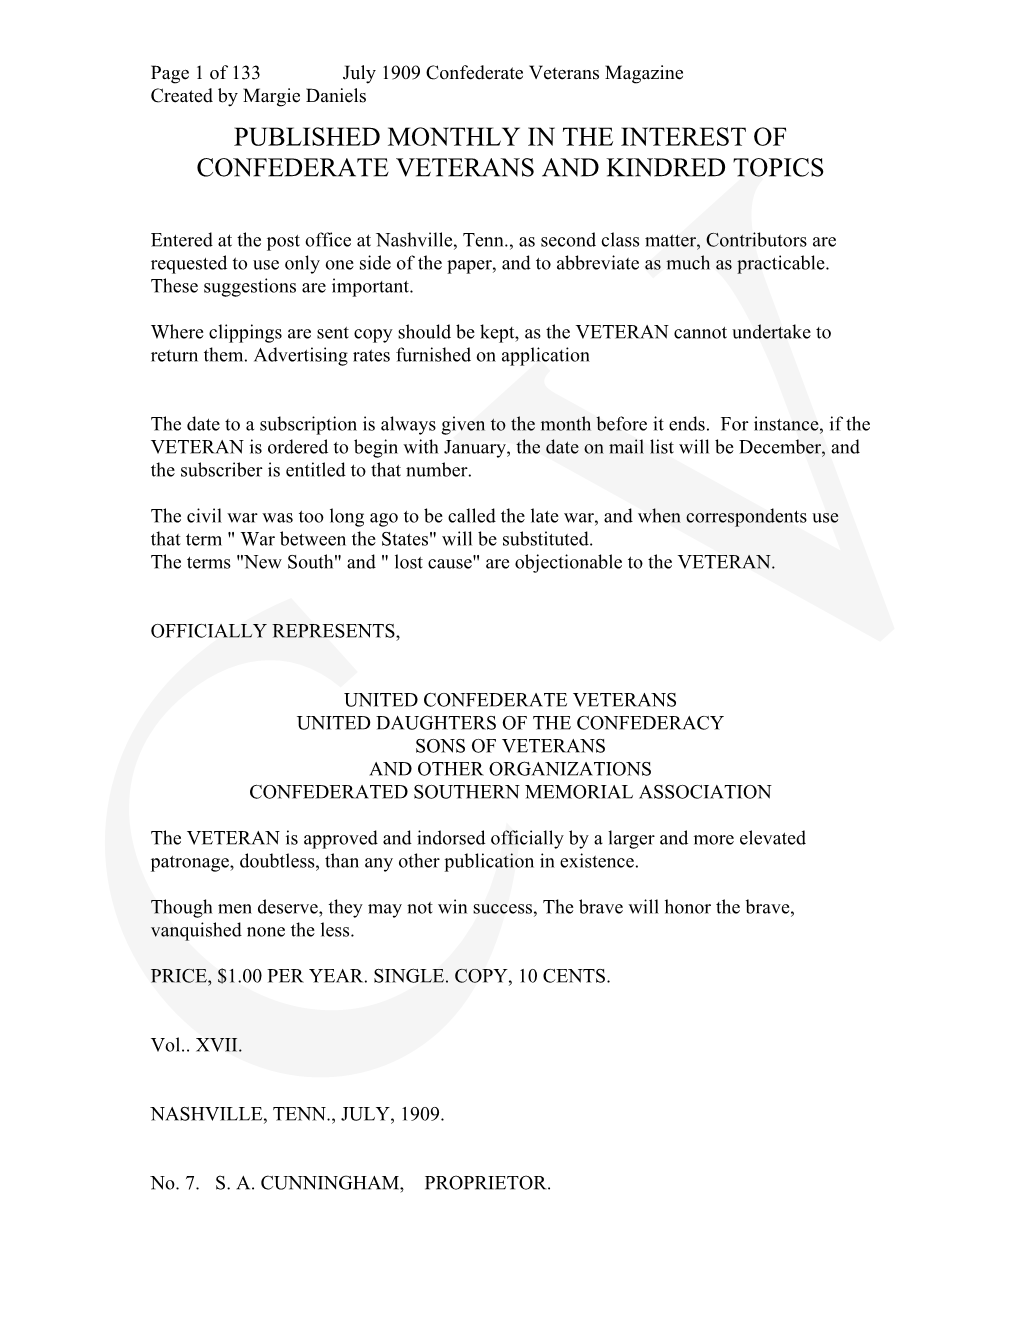 Published Monthly in the Interest of Confederate Veterans and Kindred Topics